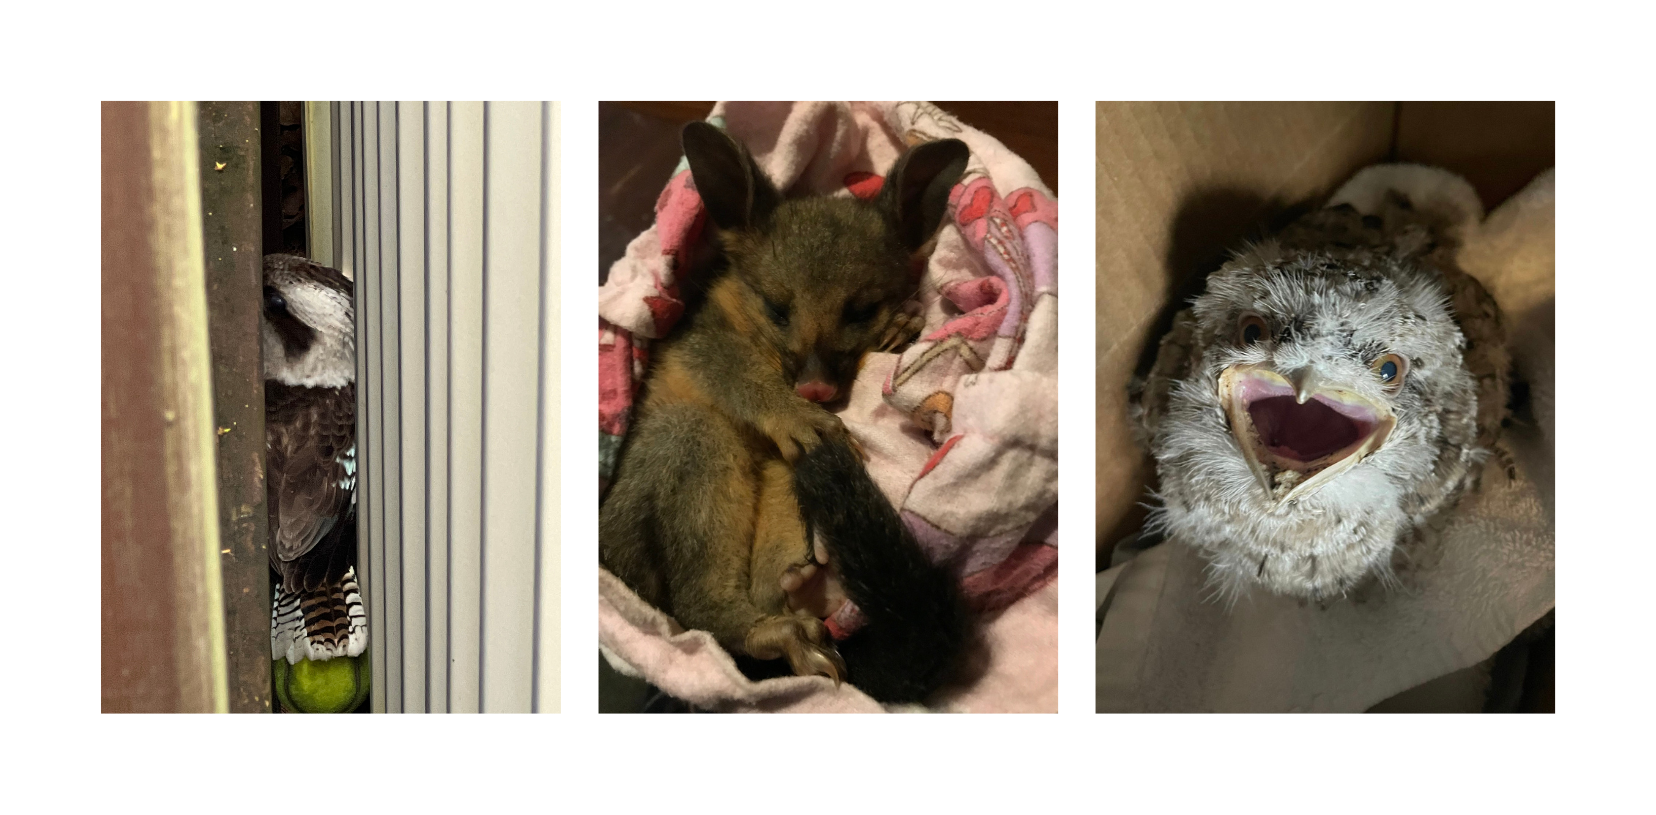 Trapped Kookaburra, baby brushtail possum and baby tawny frogmouth